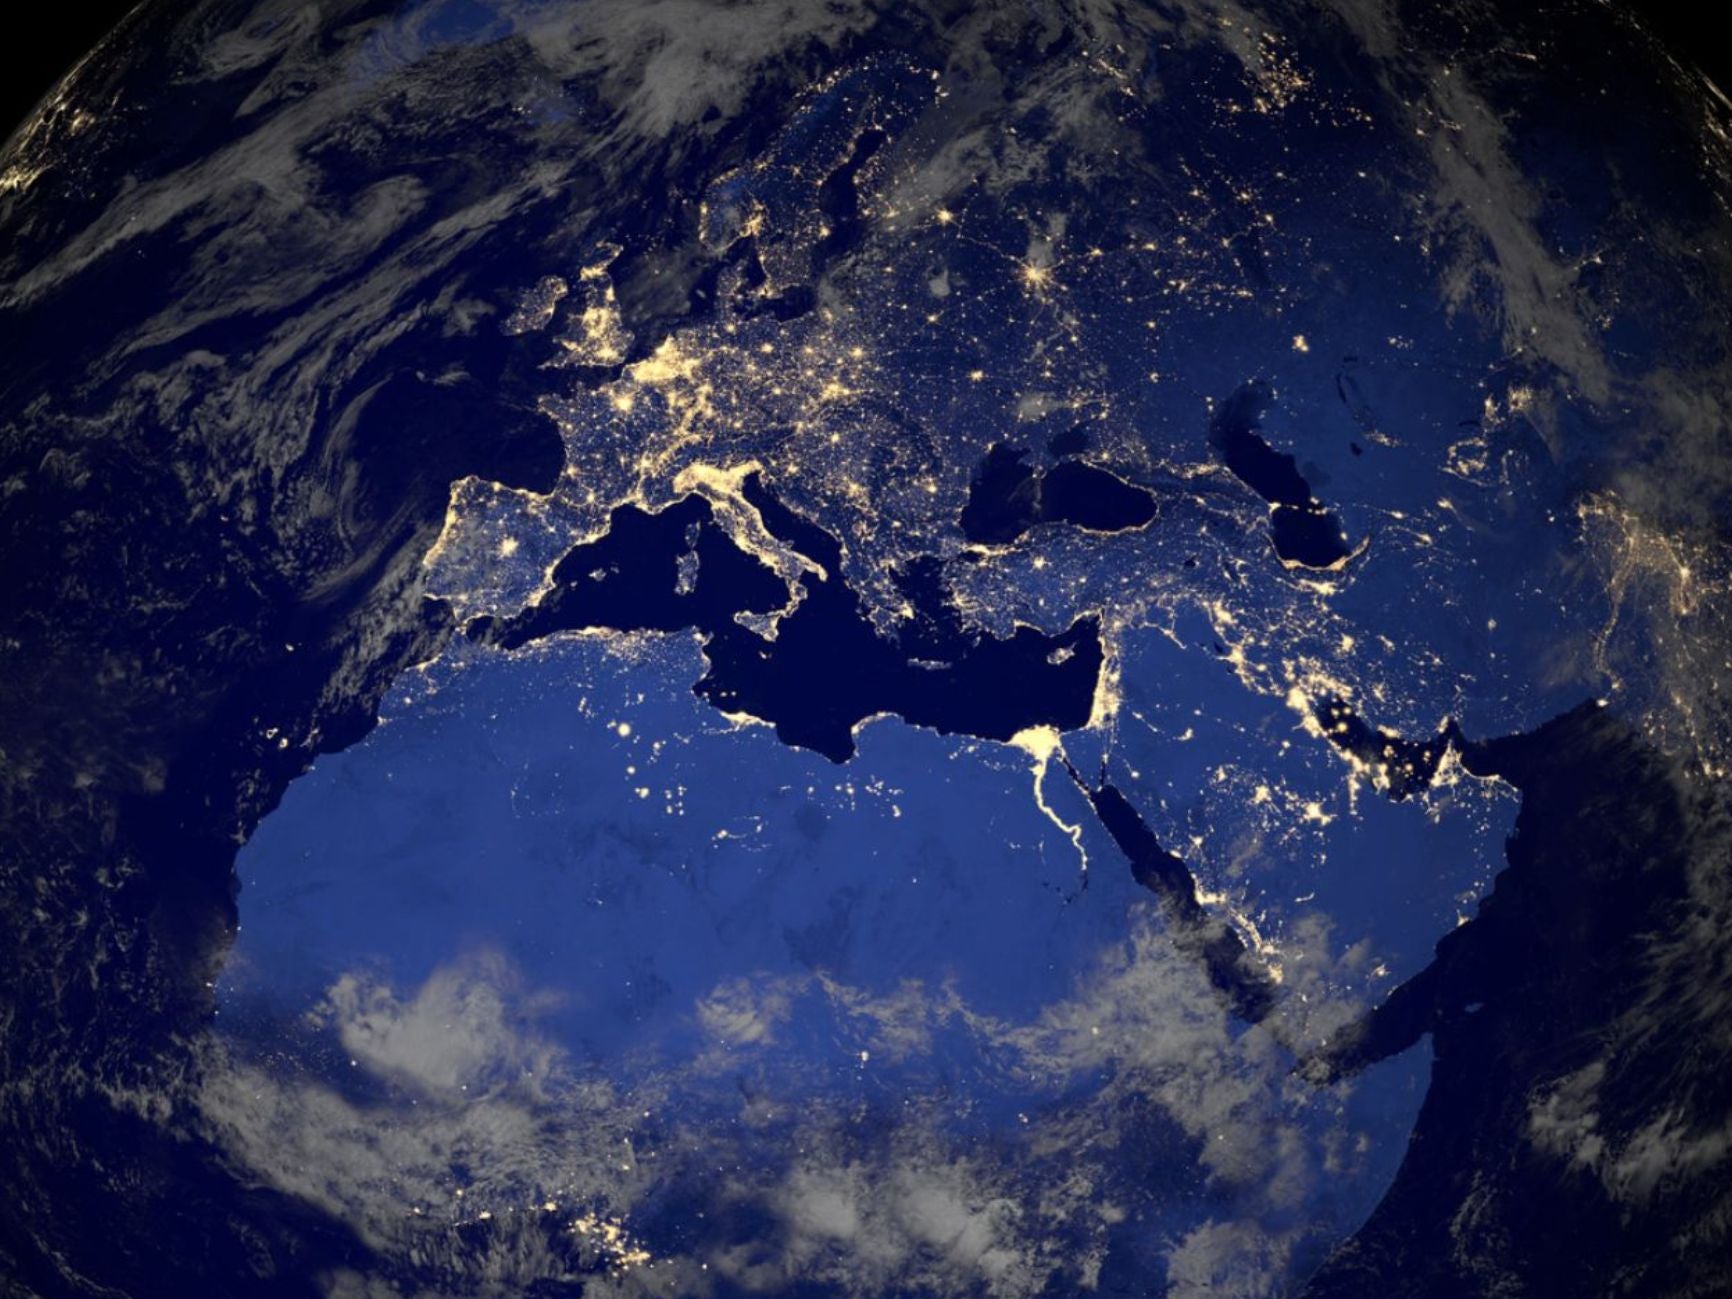 The earth, as viewed from space